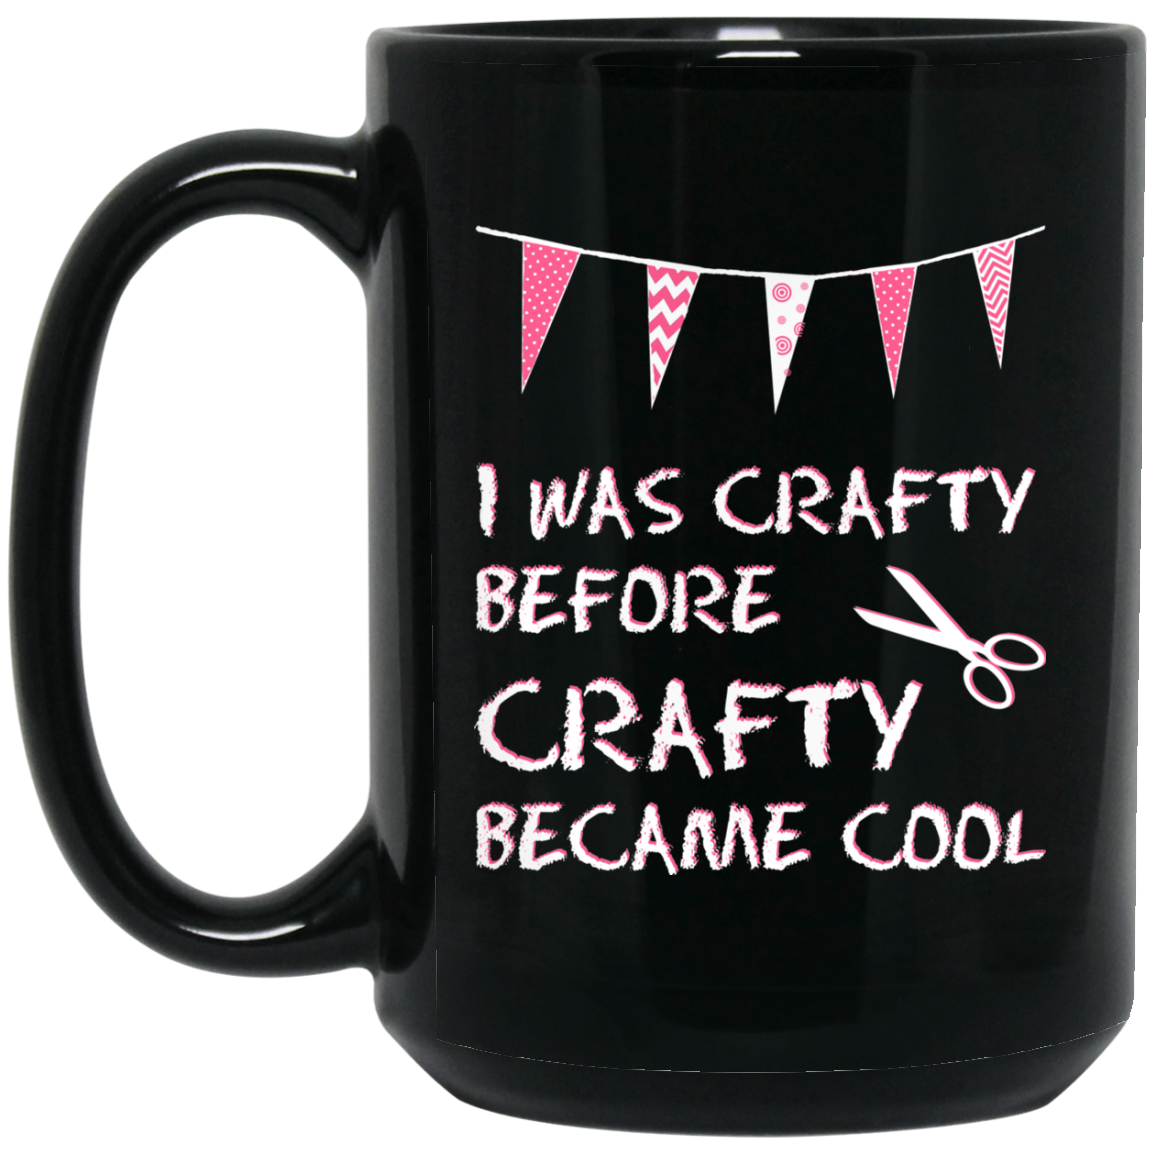 I was Crafty Before Crafty Became Cool Black Mugs